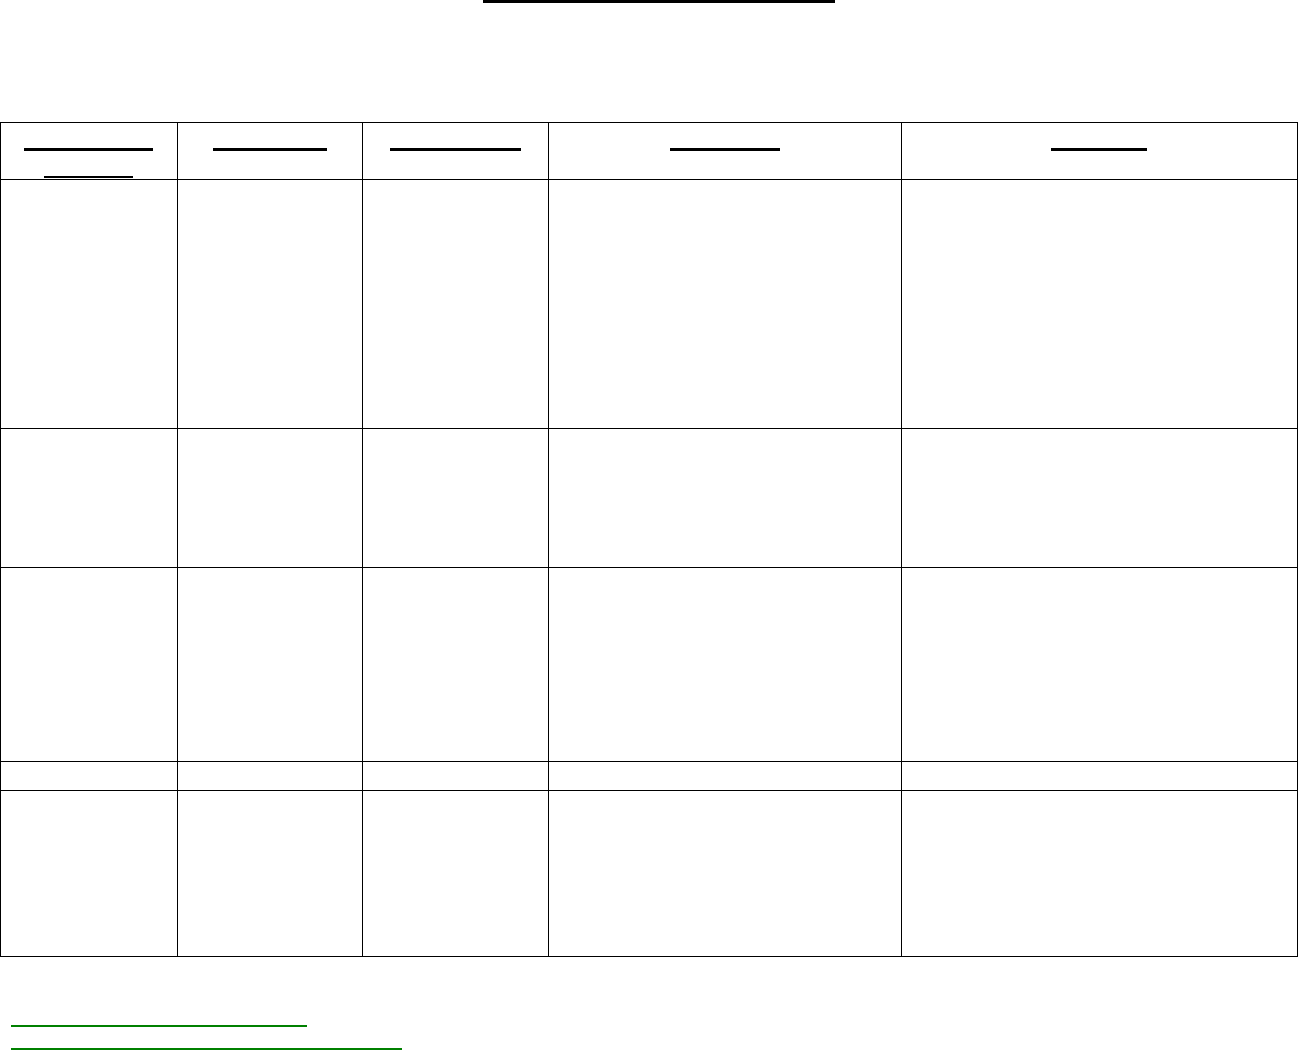 Root Cause Analysis Template 3